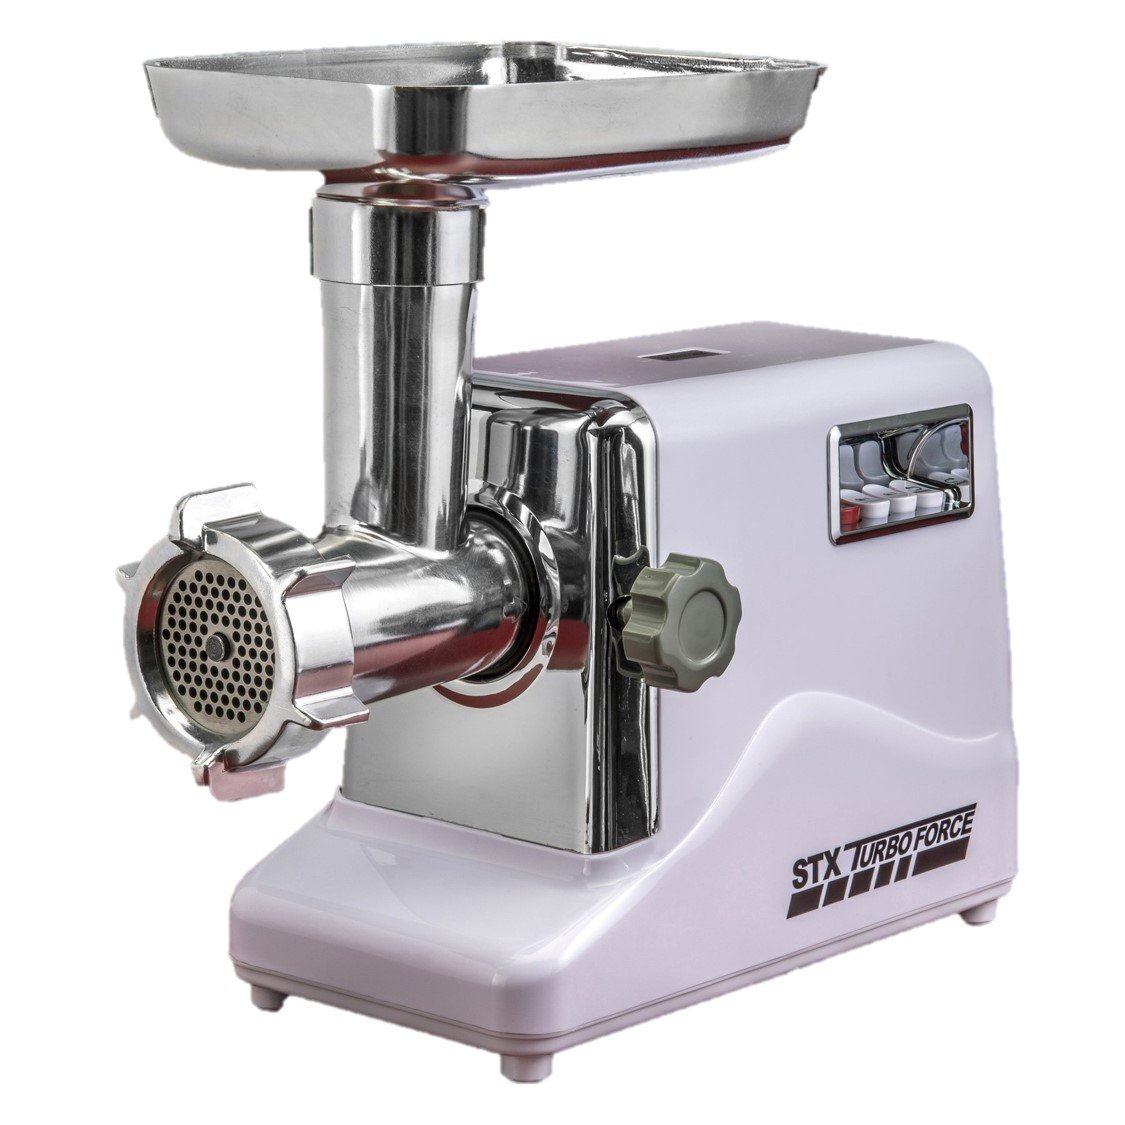 Weston Pro Series Meat Grinder Review